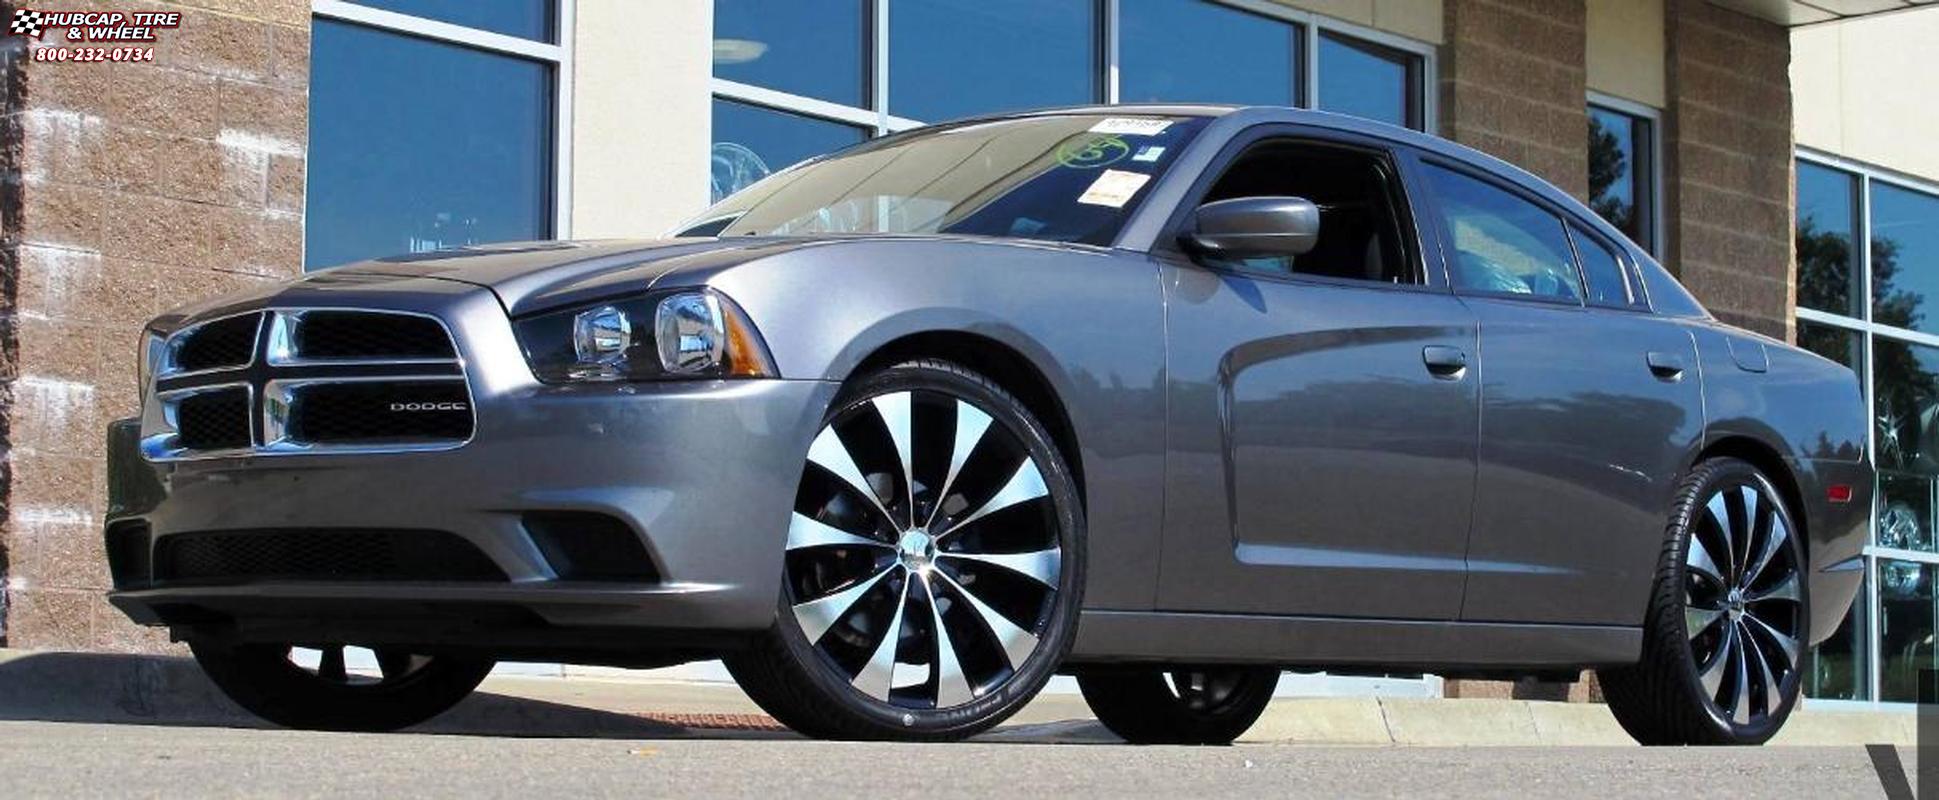 vehicle gallery/2012 dodge charger xd series km679 fader  Gloss Black Machined wheels and rims